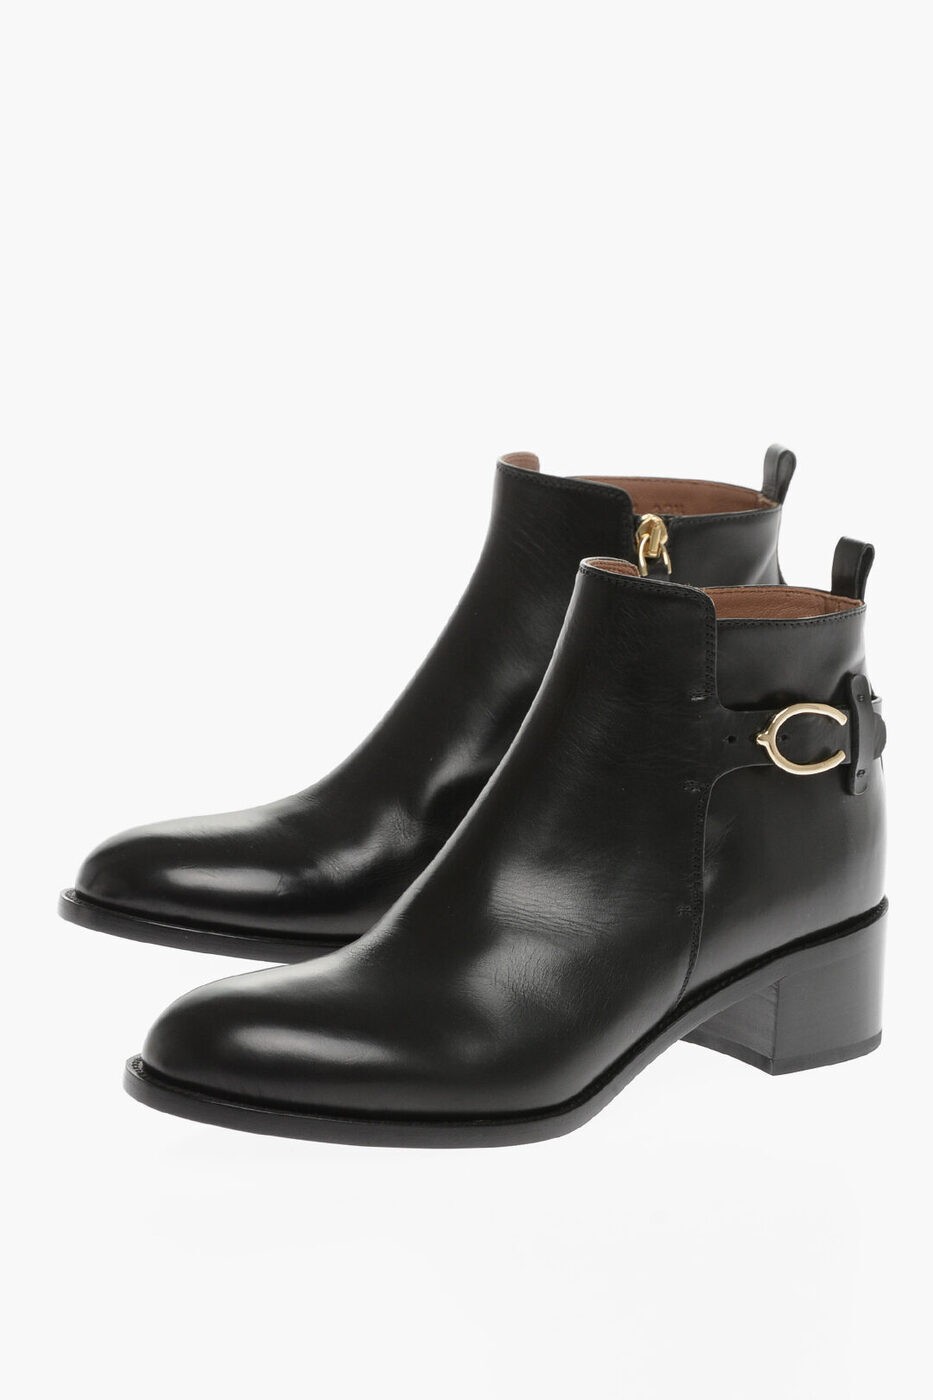 SARTORE サルトル ブーツ SR4221NERO レディース LEATHER PARLA ANKLE BOOTS WITH SIDE ZIP AND GOLDEN BUCKLE HE 【関税・送料無料】【ラッピング無料】 dk